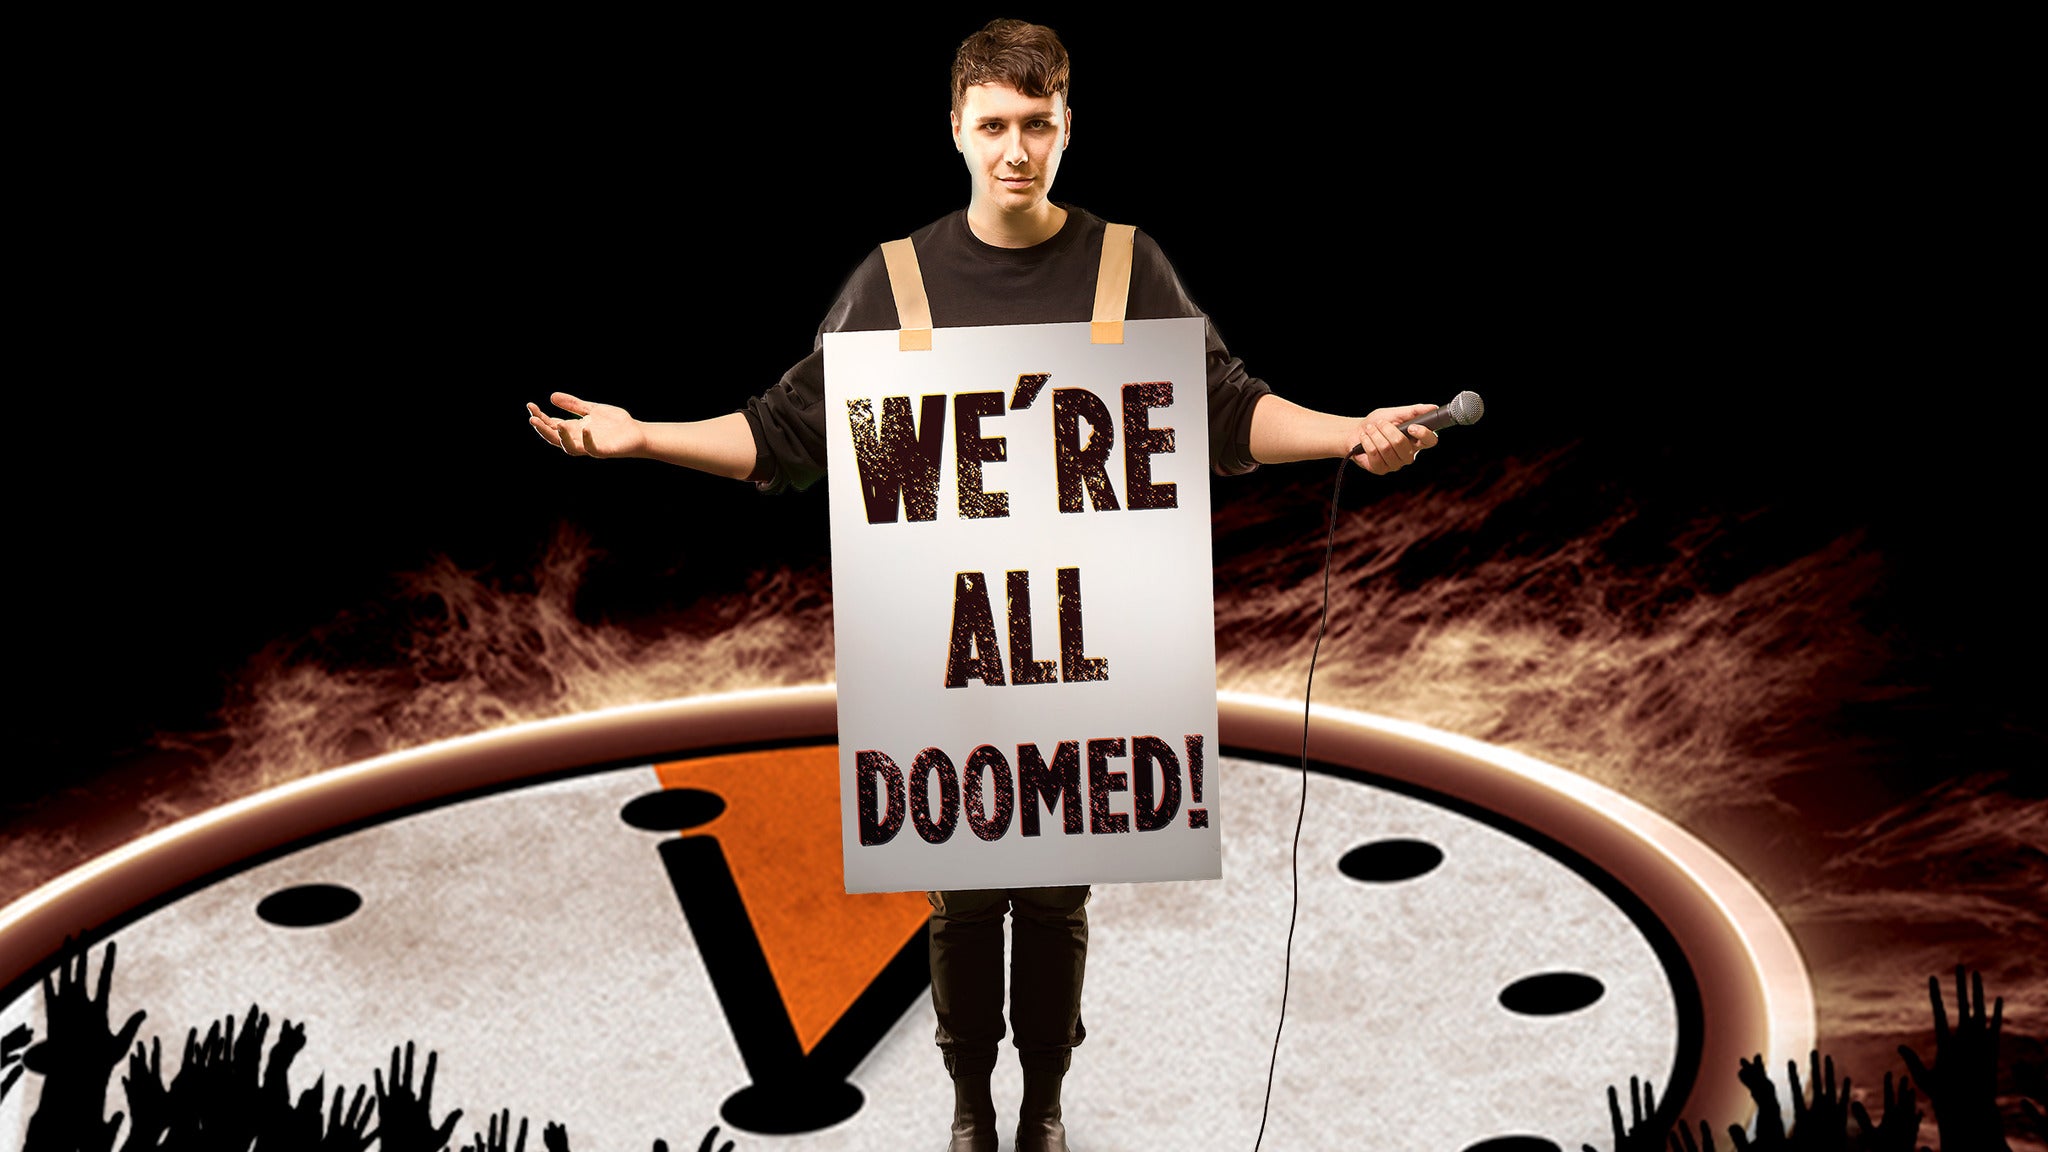 Daniel Howell: We're All Doomed! at The Factory - Chesterfield, MO 63005